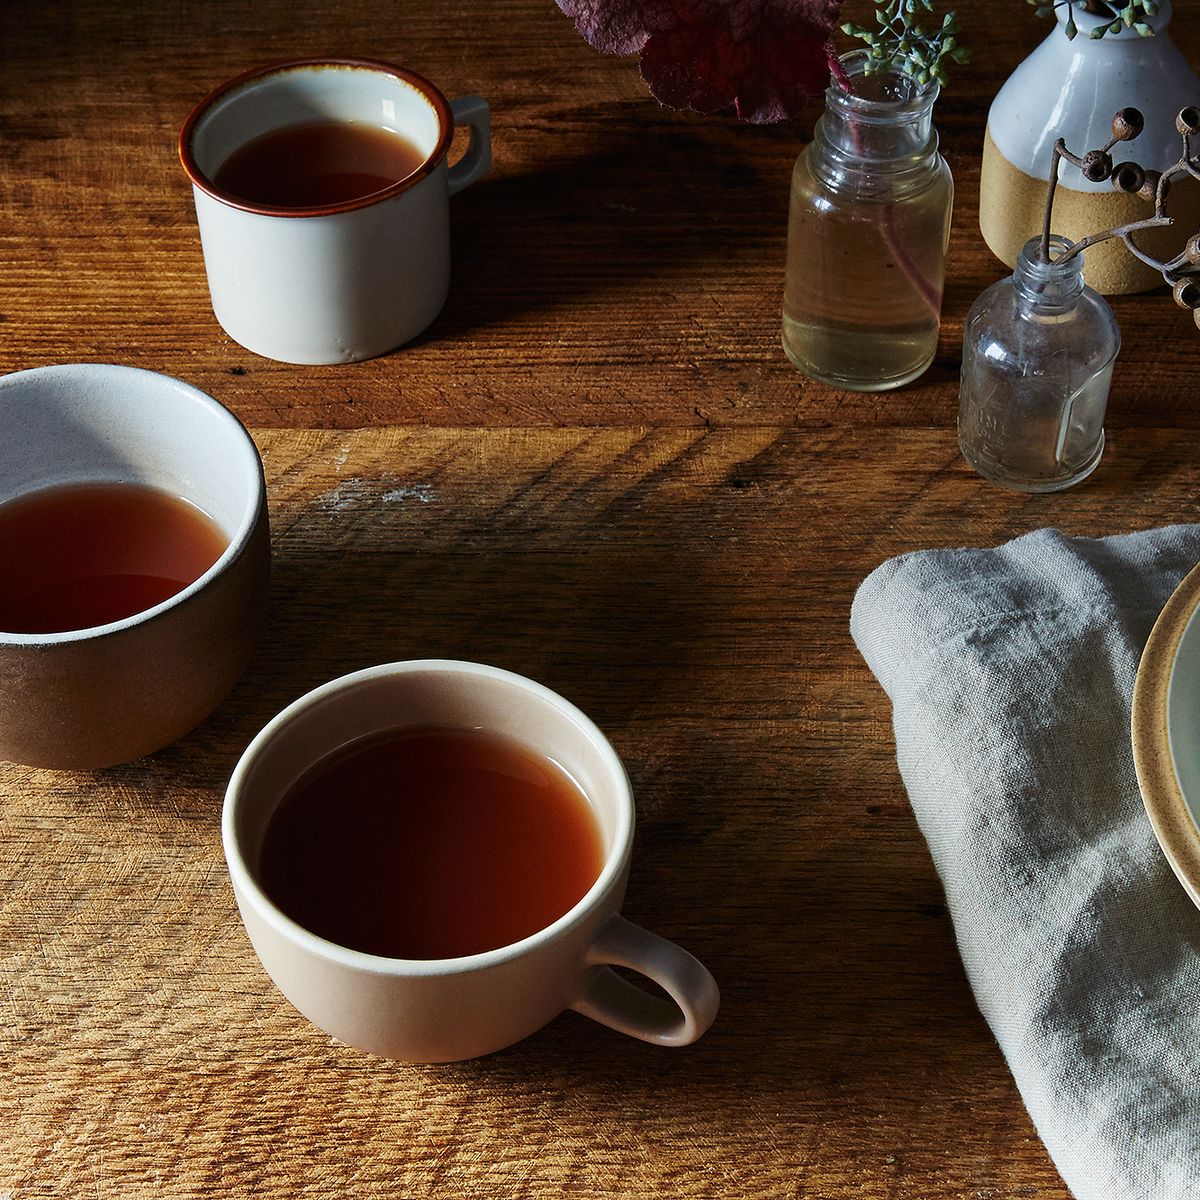 Tea and Art: Exploring the Intersection of Tea and Creativity